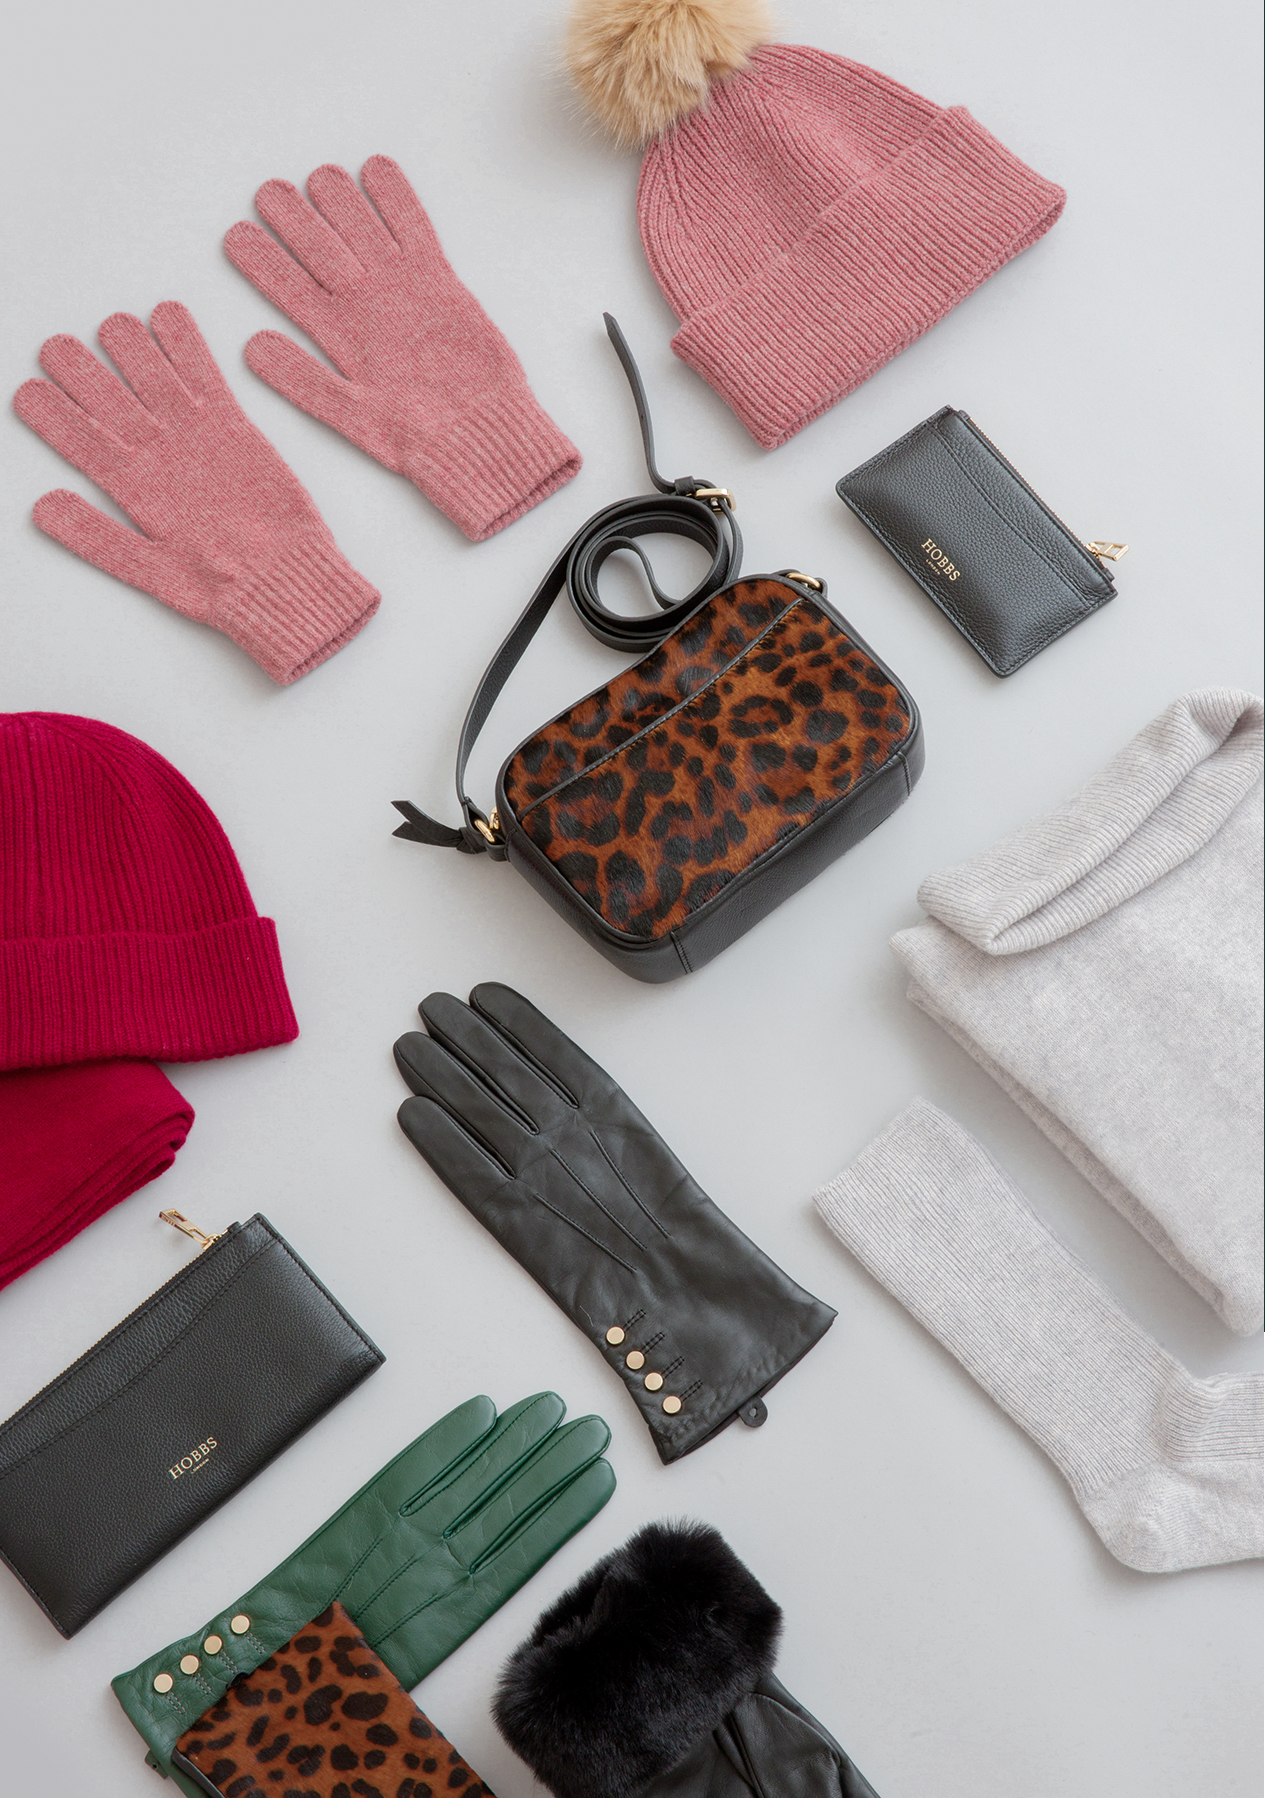 Image showing a selection of Christmas gifts, including jumpers, scarves, socks and gloves.